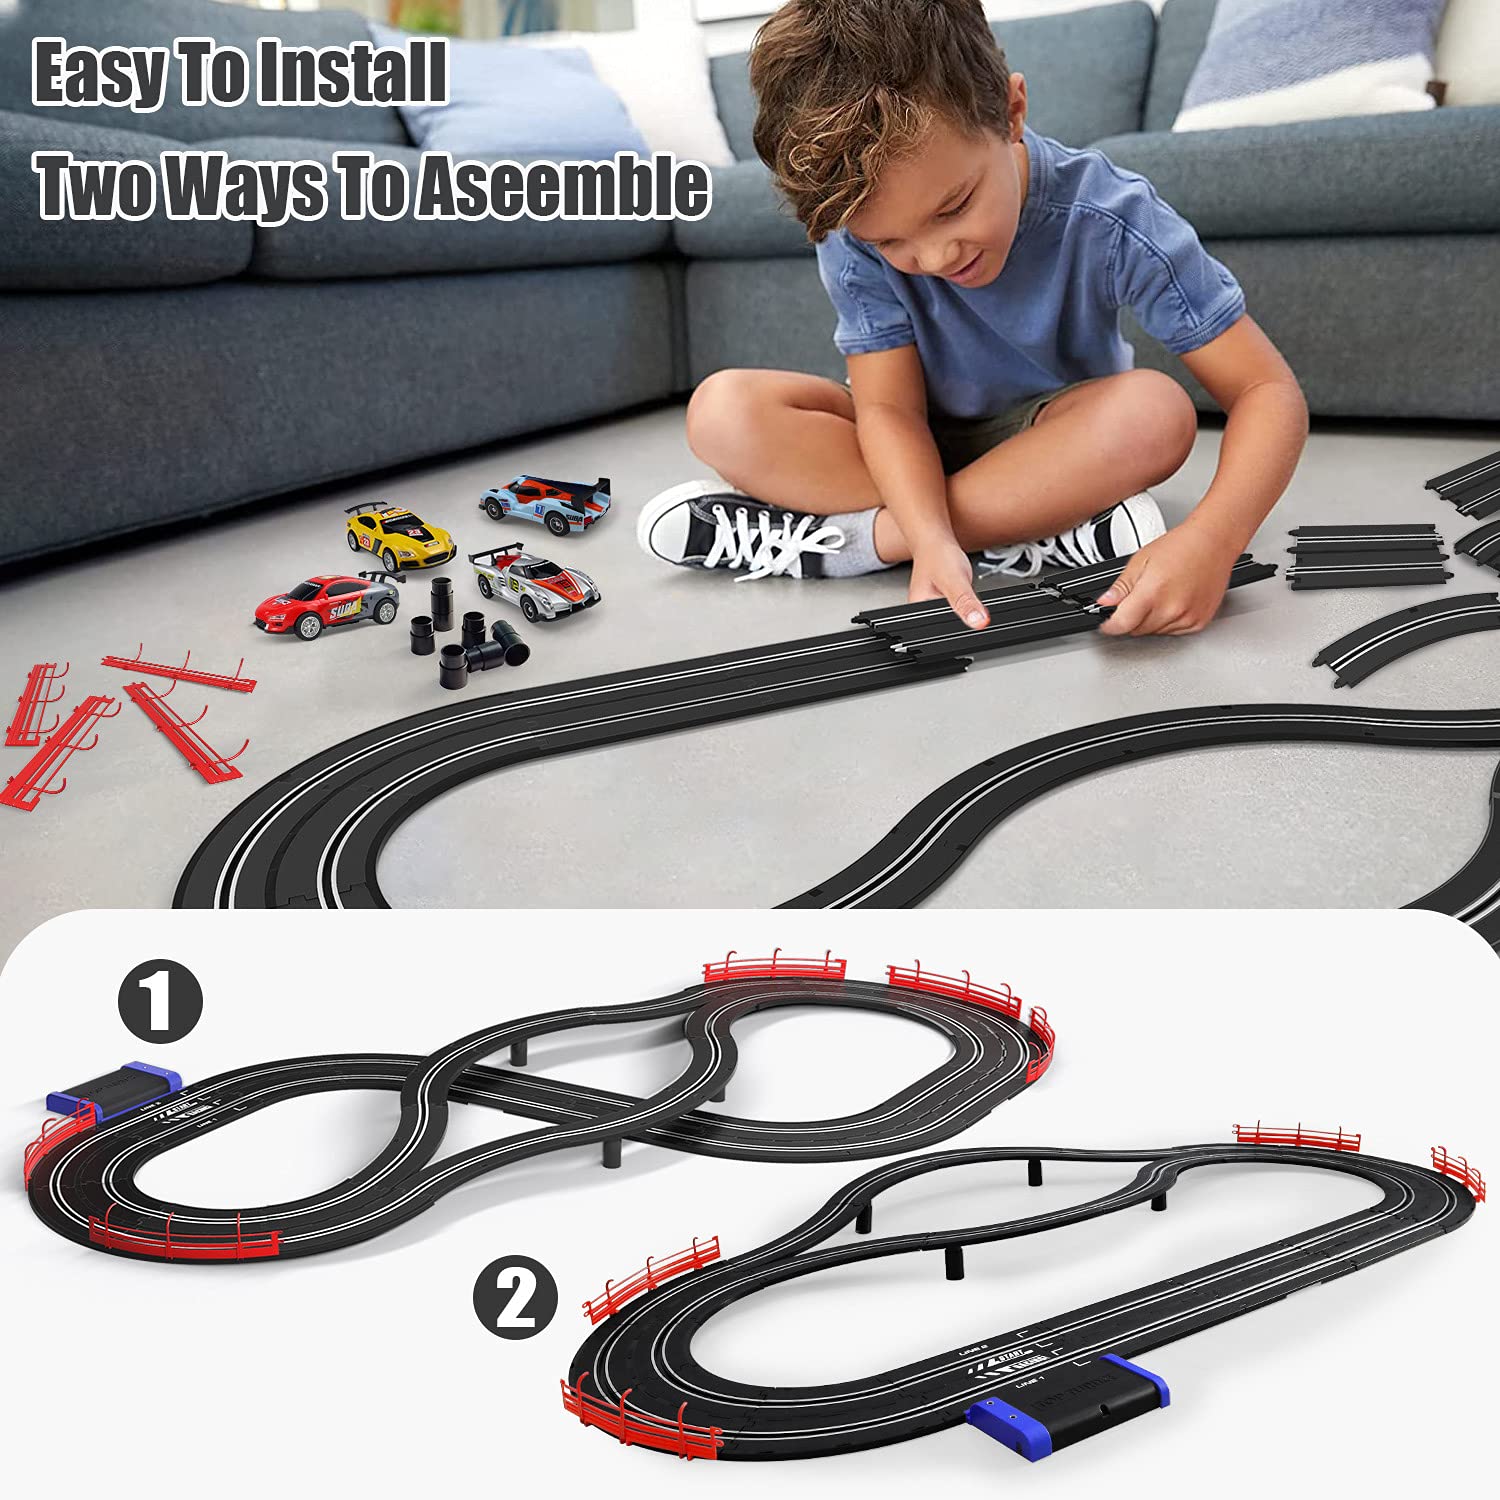 Electric Racing Tracks for Boys and Kids Including 4 Slot Cars 1:43 Scale with Headlights and Dual Racing, Race Car Track Sets with 2 Hand Controllers, Gift Toys for Children Over 8 Years Old